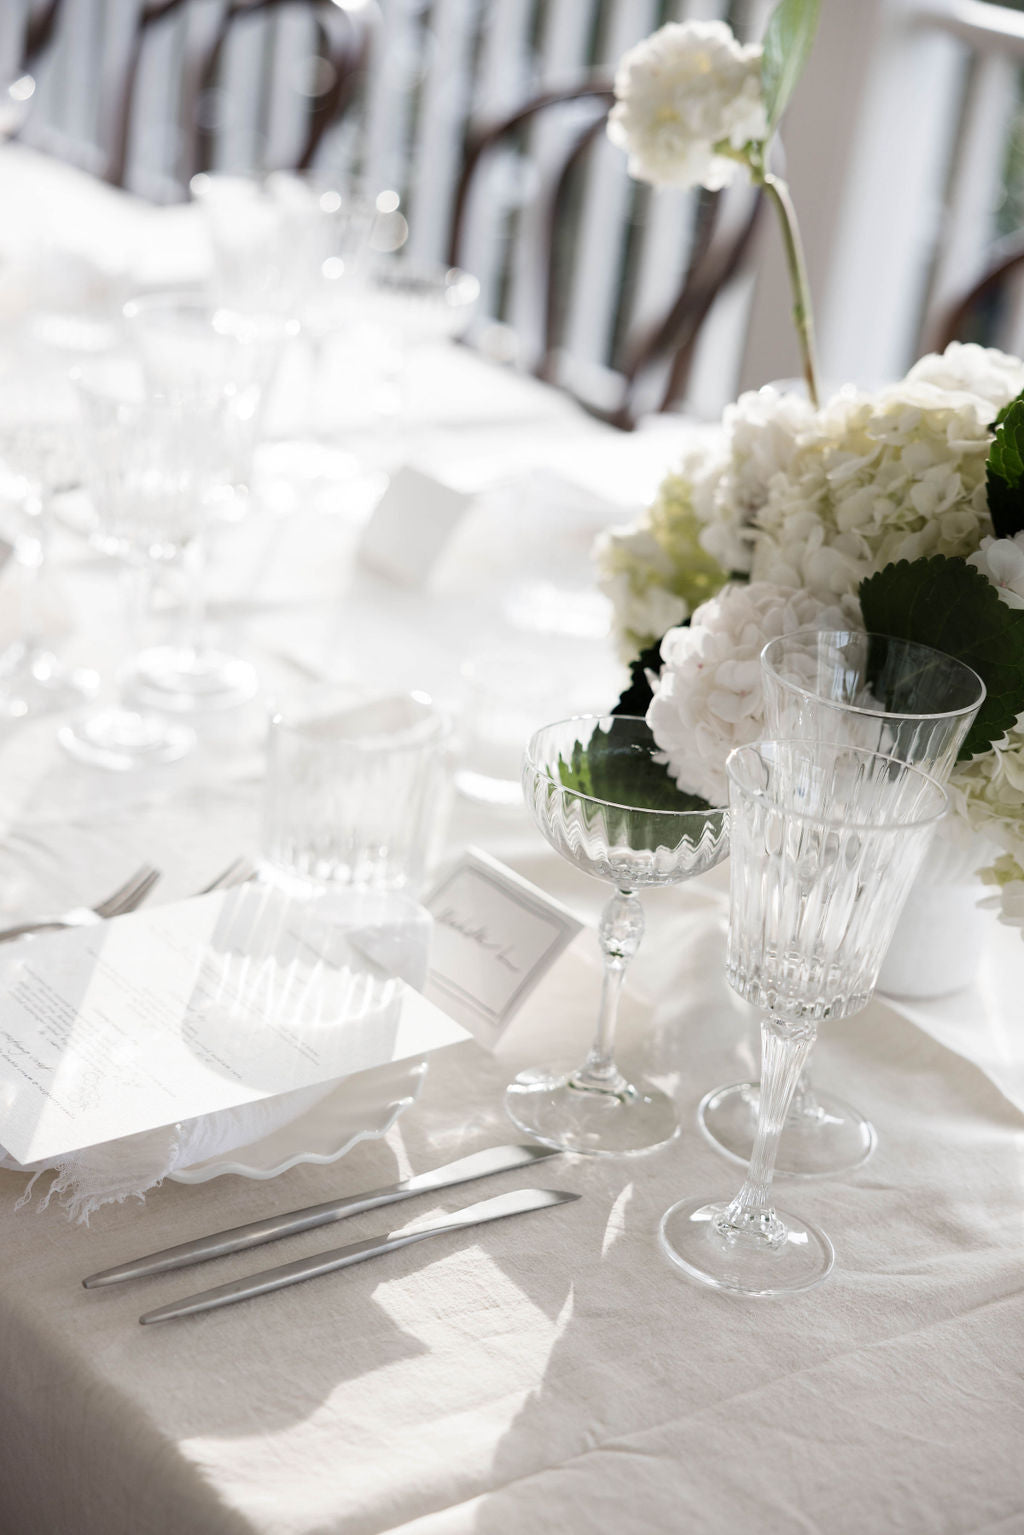 Silver cutlery for hire | For Love & Living Wedding & Event Hire